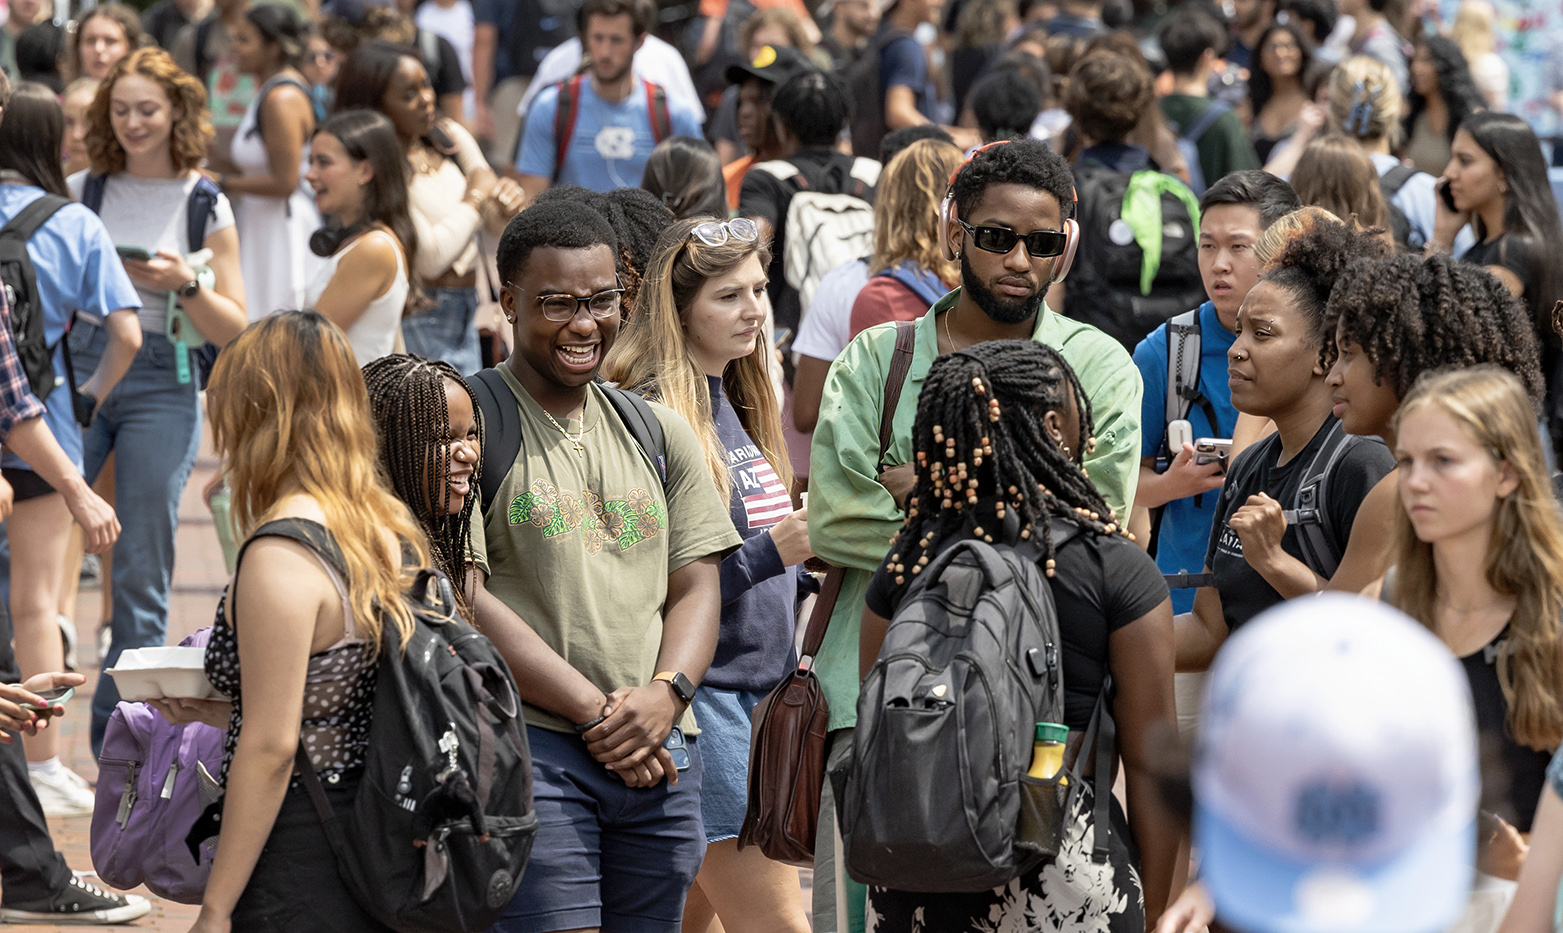 A crowd of students conversing around the Pit area on the campus of UNC-Chapel Hill.